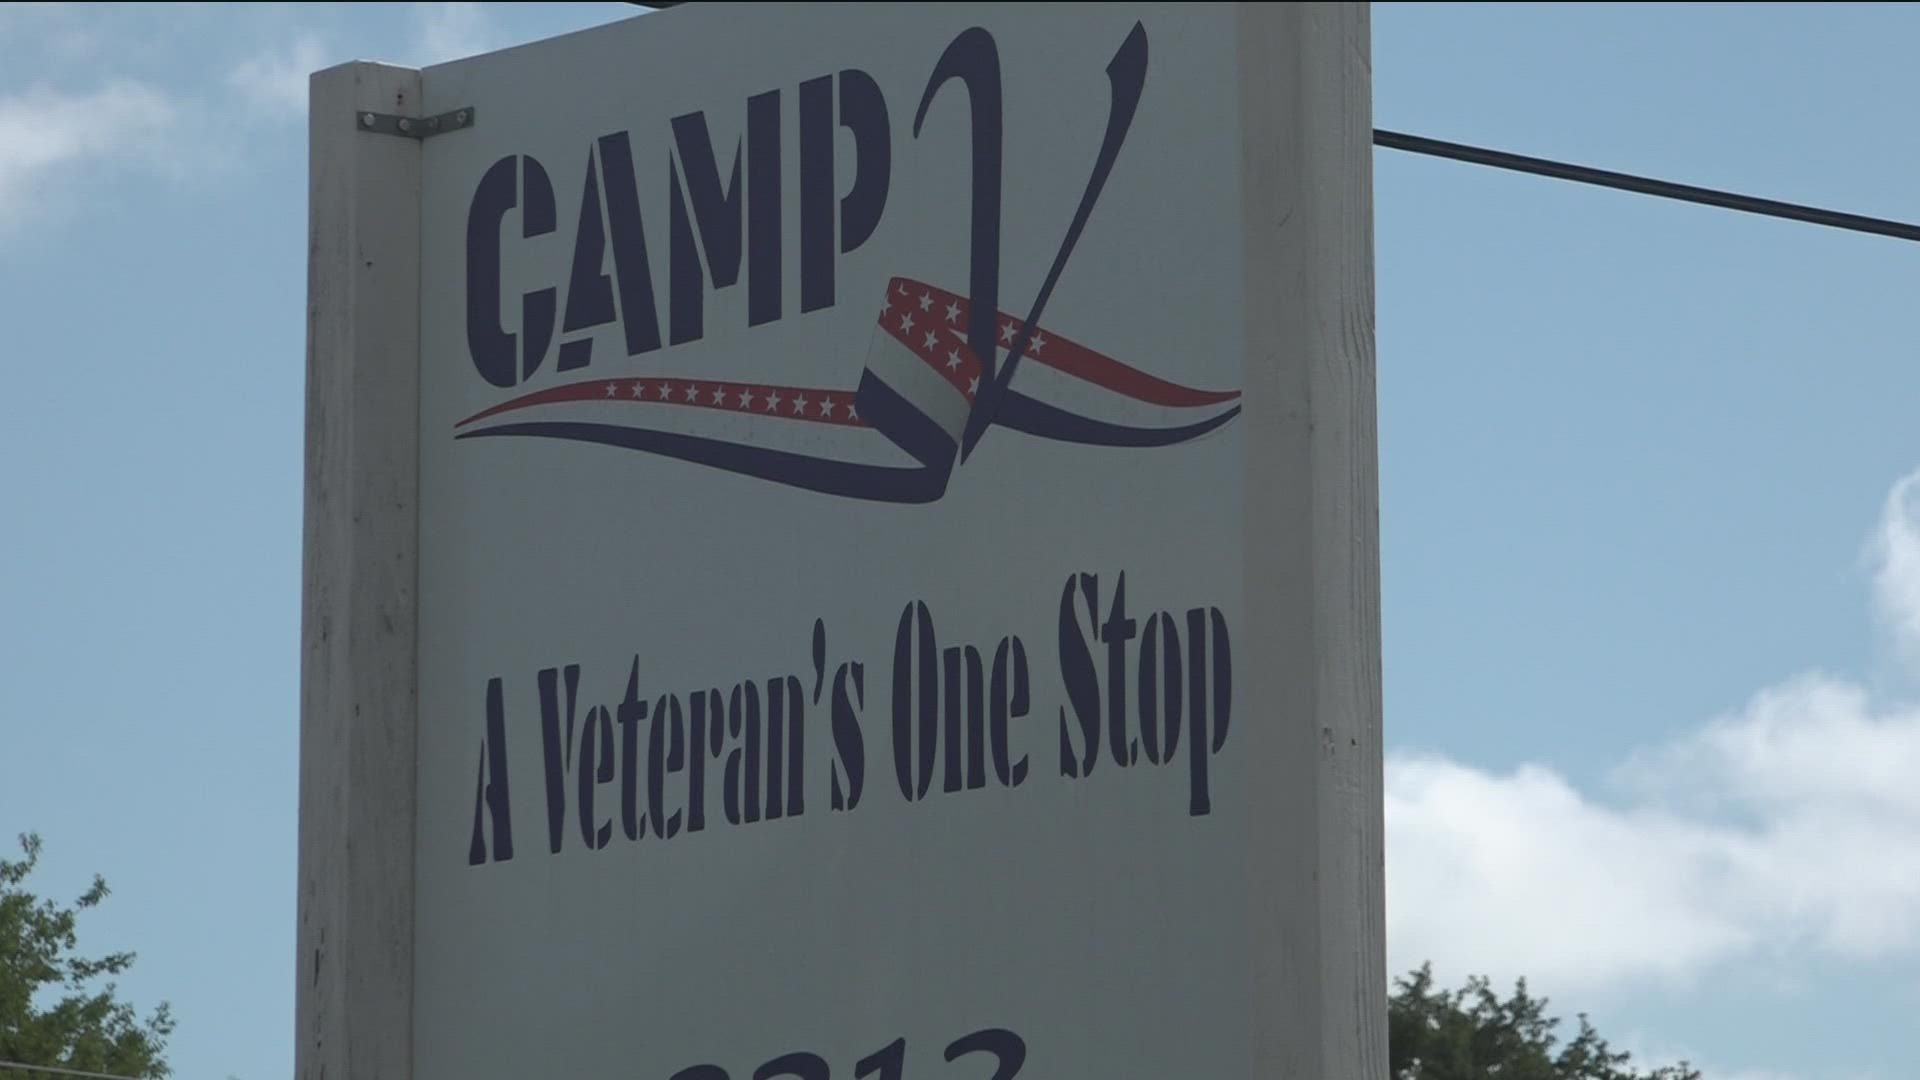 Proceeds from the event going back to CampV, an East Texas one-stop veteran resource center.